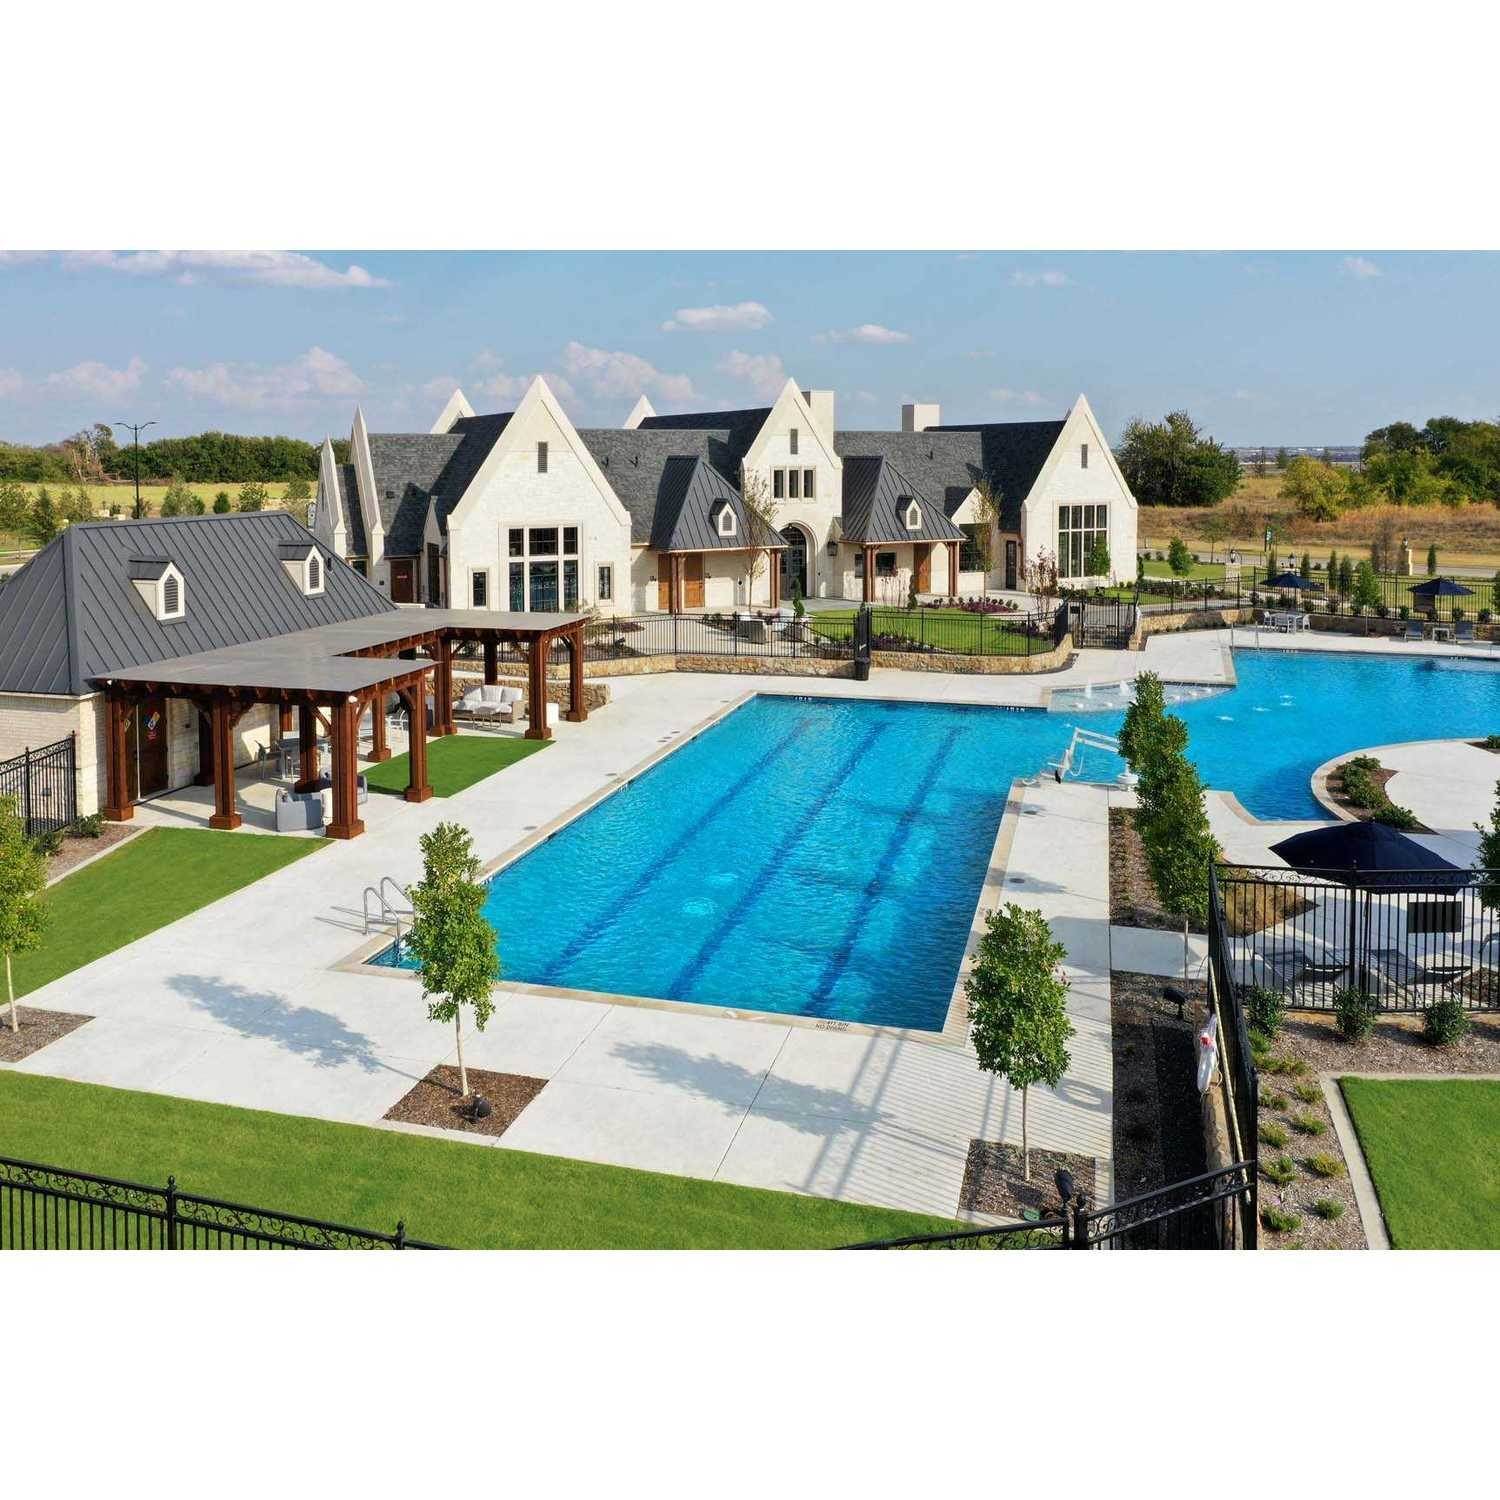 35. Cambridge Crossing 40ft. lots xây dựng tại 2237 Pinner Court, Frisco, TX 75035